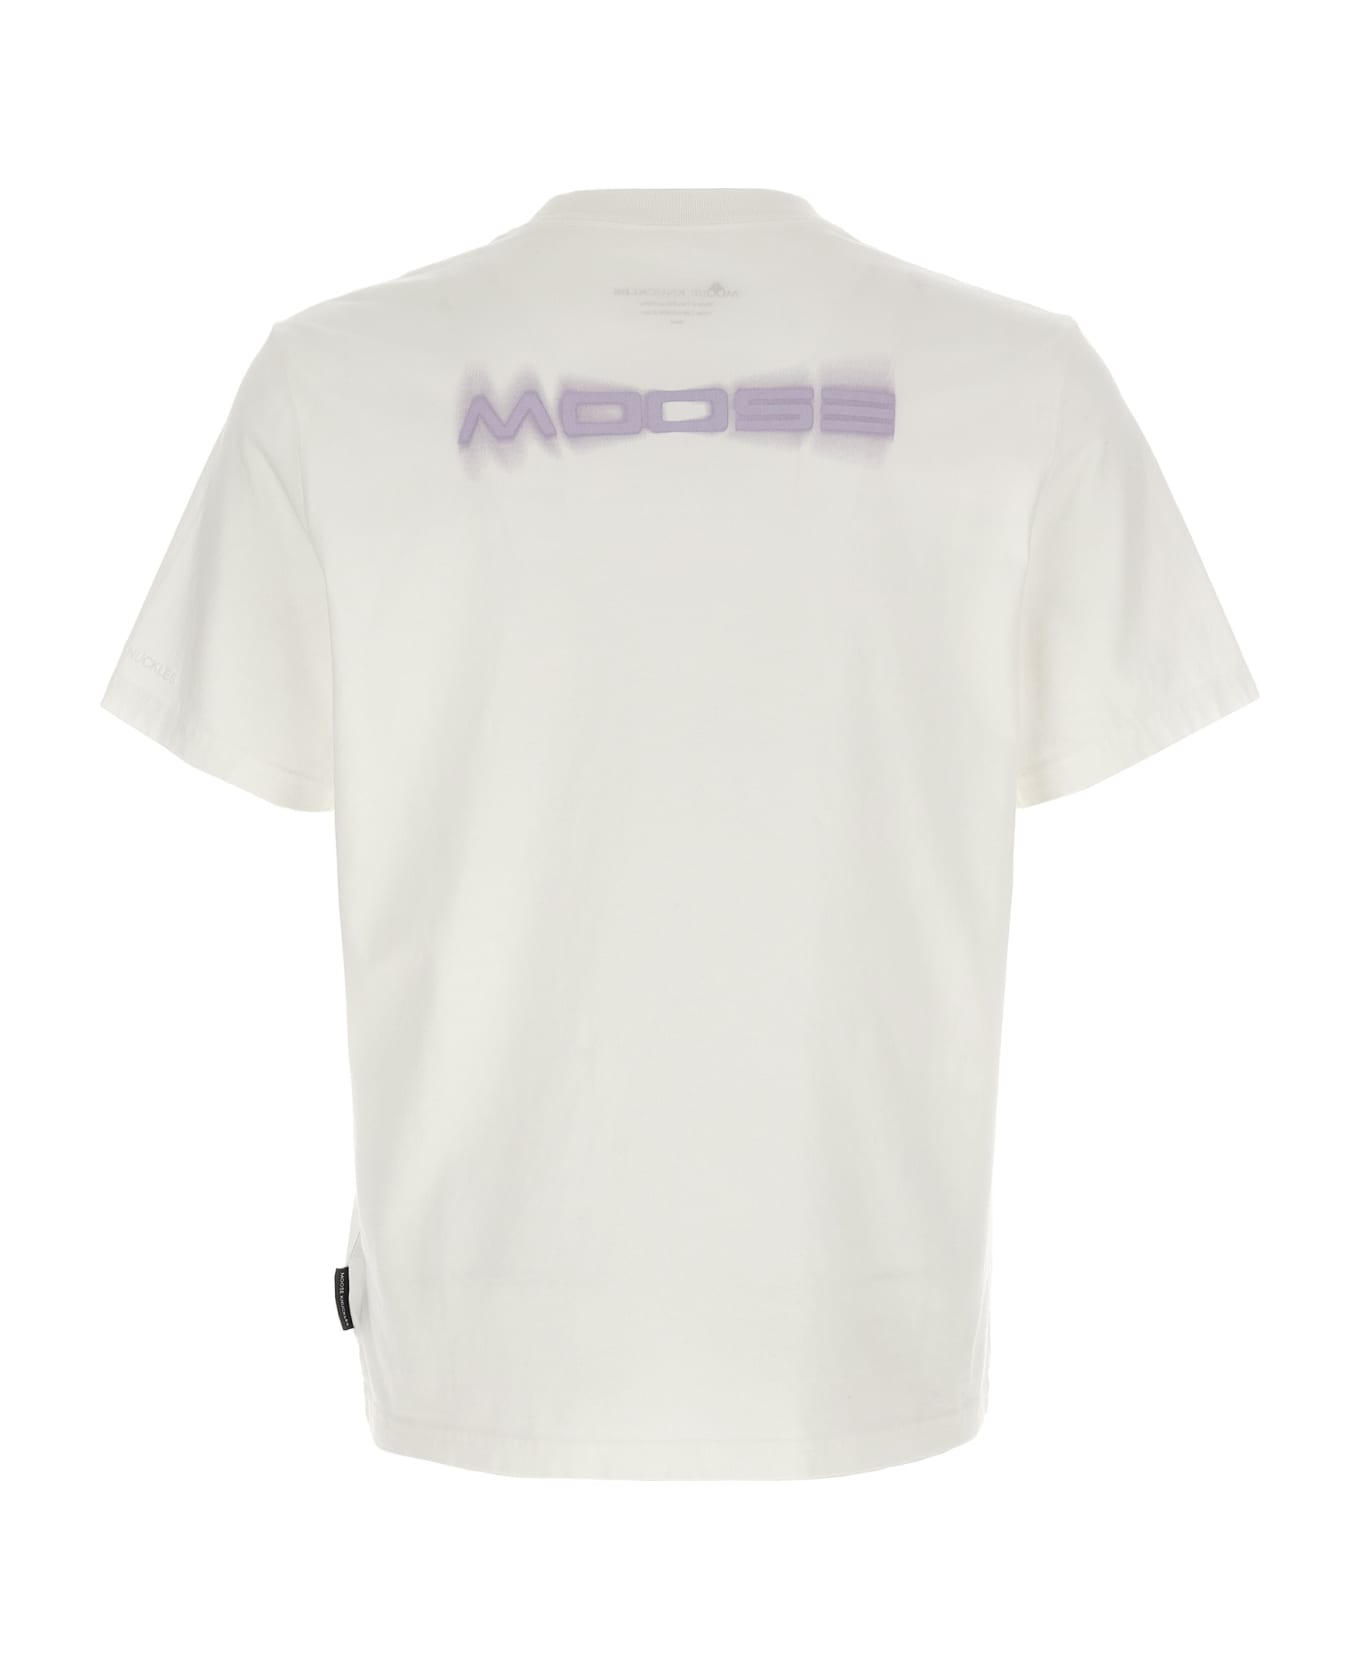 Moose Knuckles 'maurice' T-shirt - White シャツ